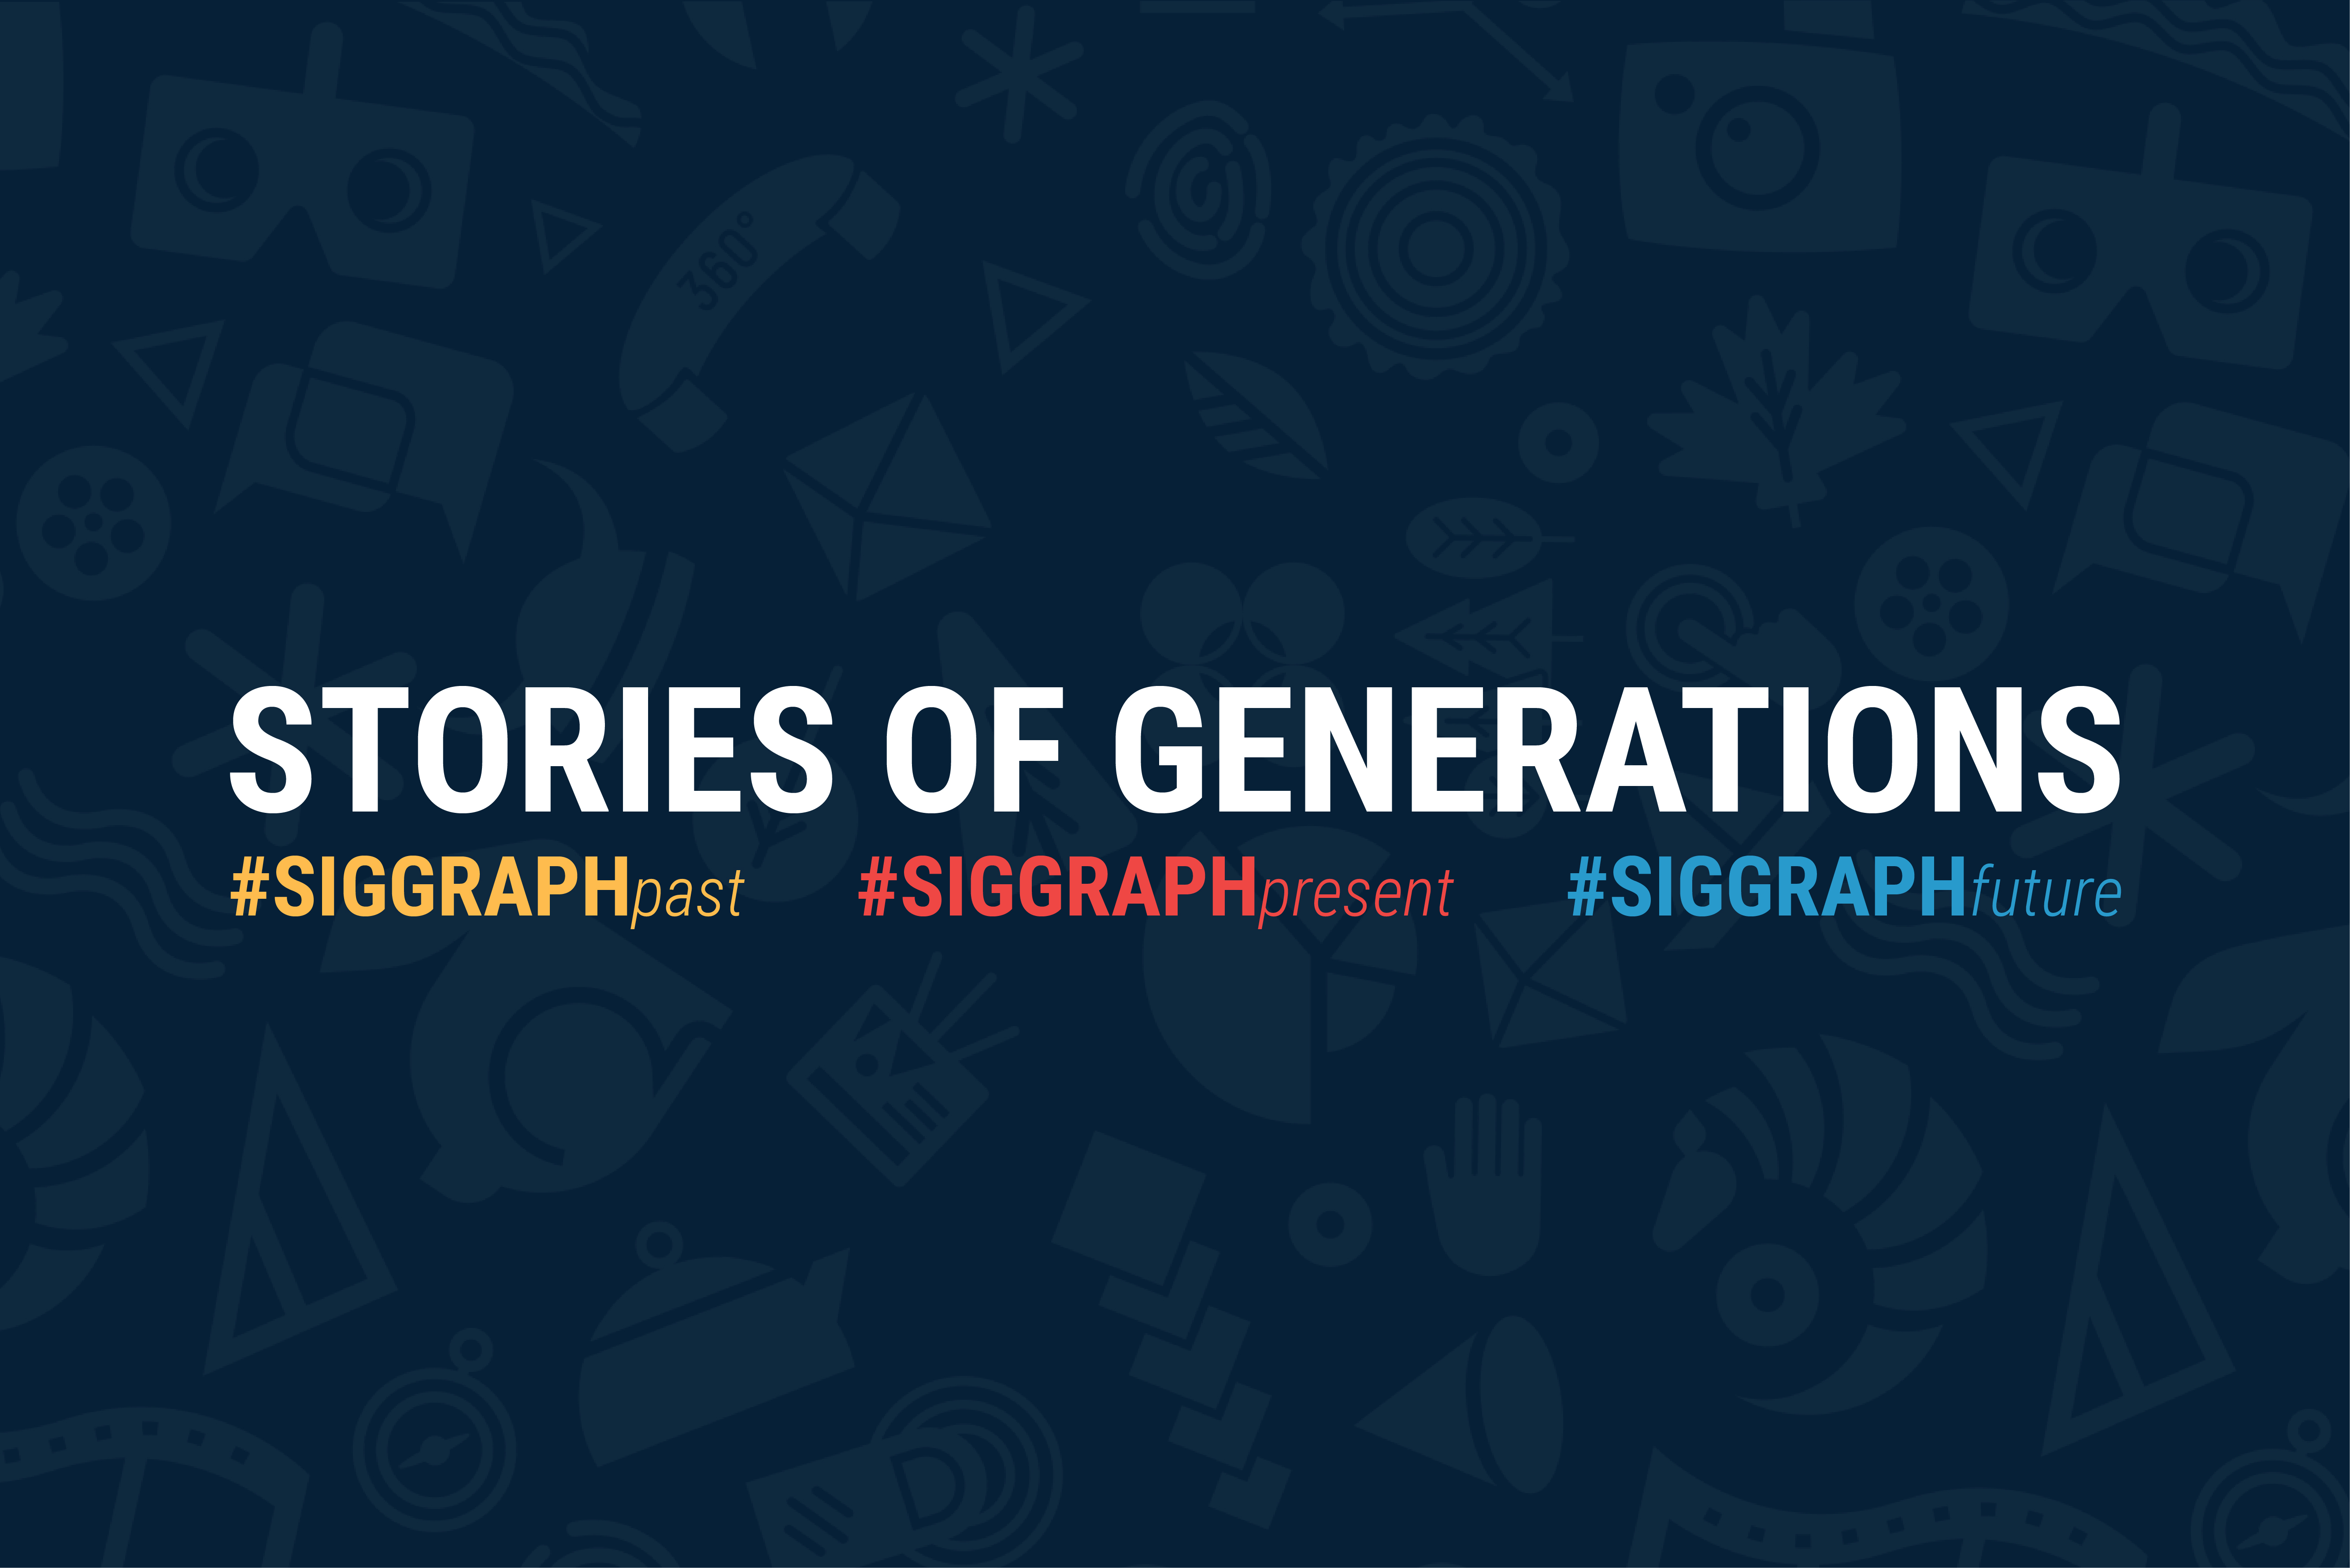 SIGGRAPH 2018: Share Your ‘Generations’ Stories